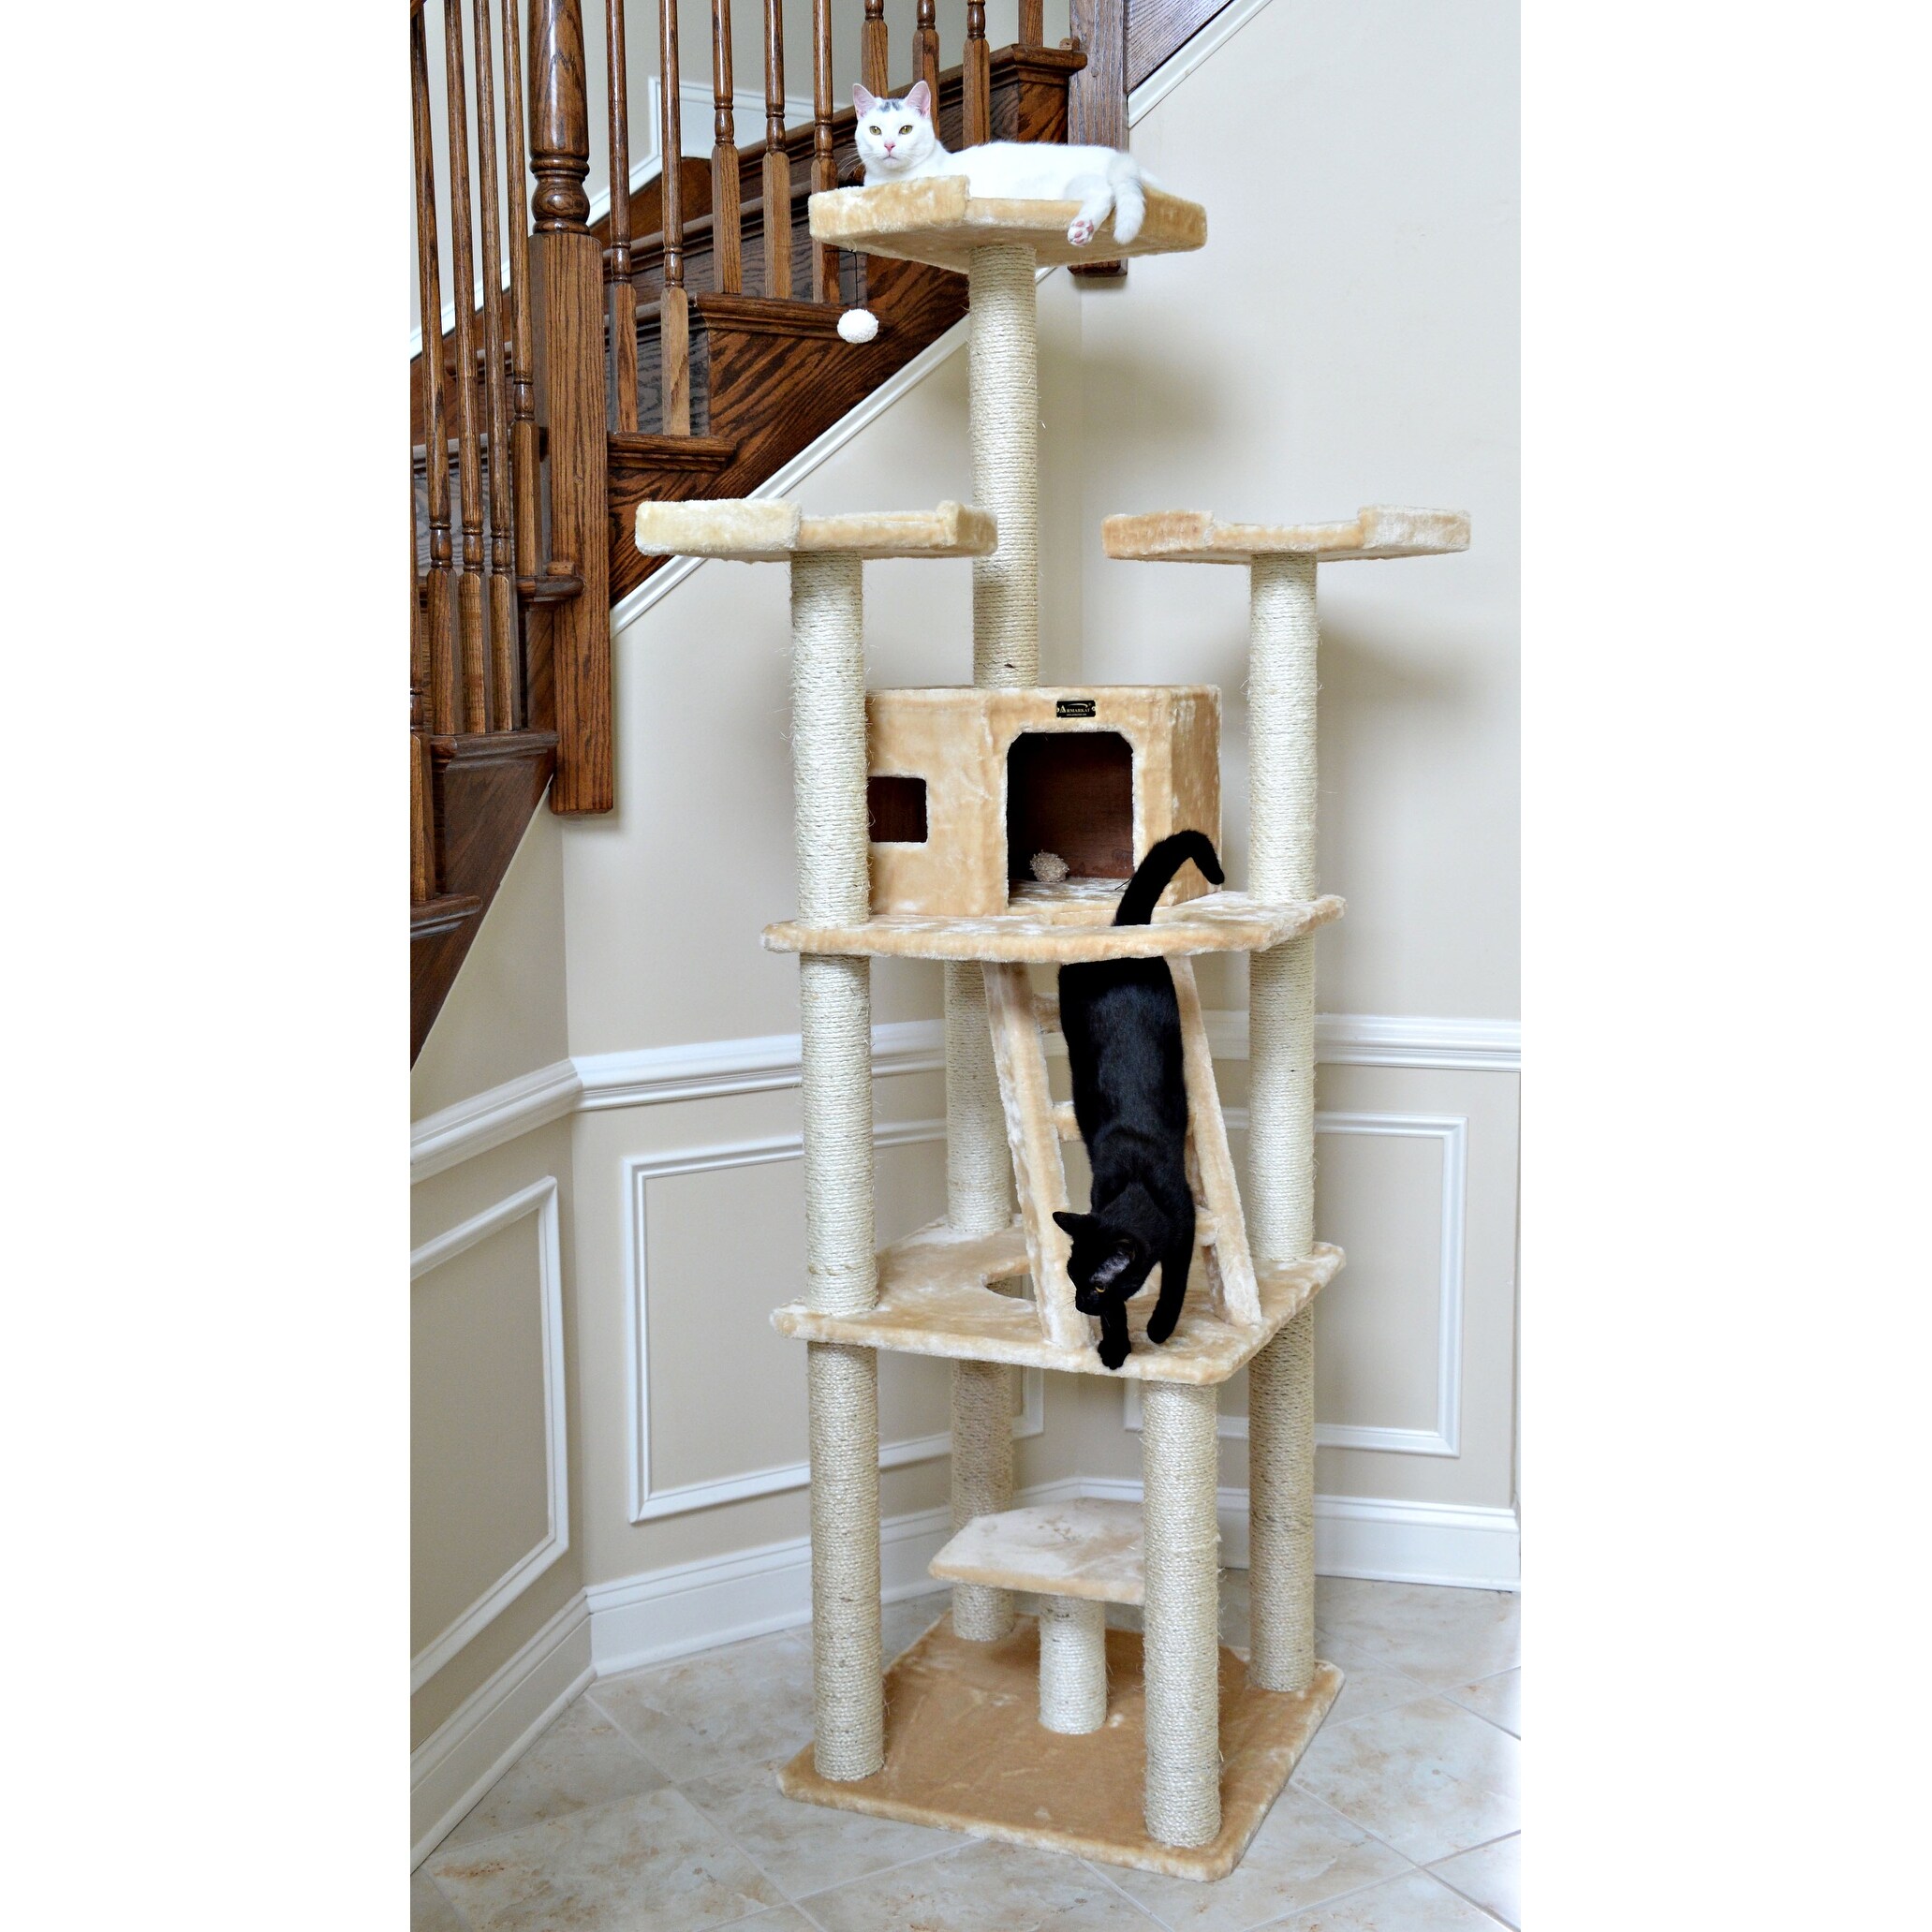 cat tree with curved perch